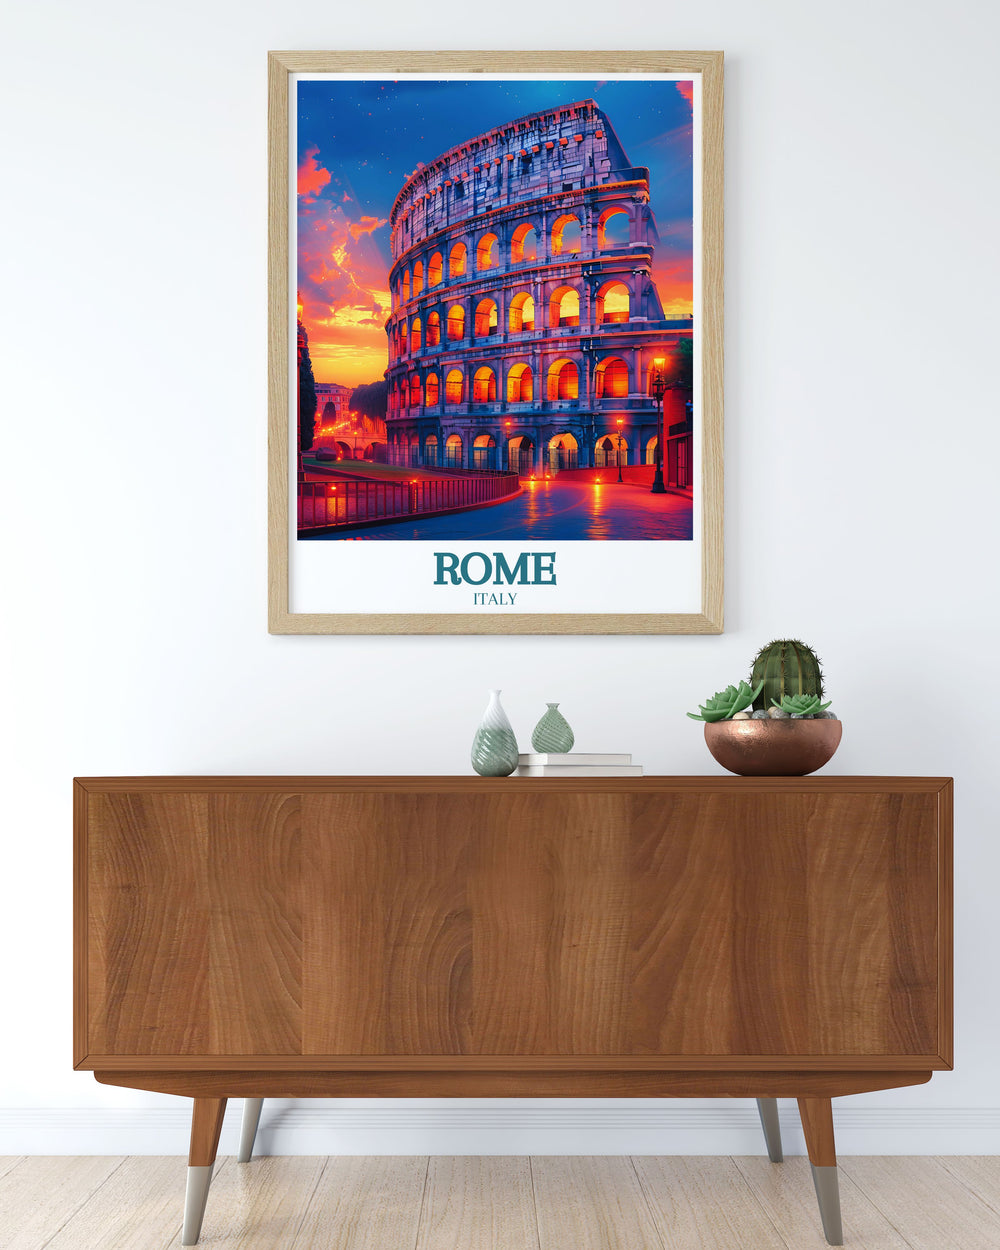 Elegant Rome poster showcasing the iconic Colosseum and Vatican City perfect for those who appreciate historical landmarks and sophisticated decor makes an excellent gift for travel enthusiasts and history buffs alike.